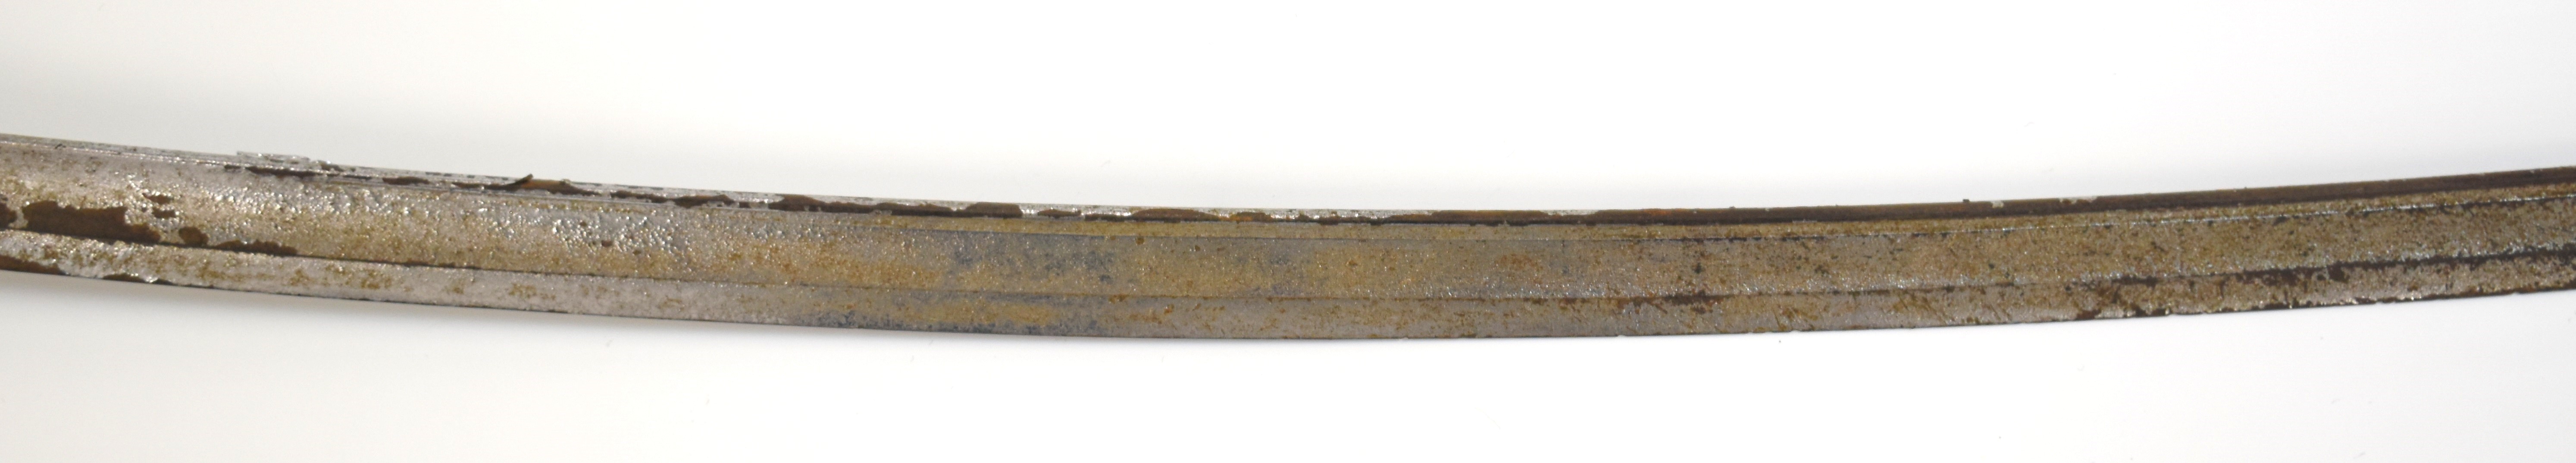 American Civil War sword with wooden grip, two bar hilt, US 1864 AGM to ricasso and Crosby - Image 21 of 26